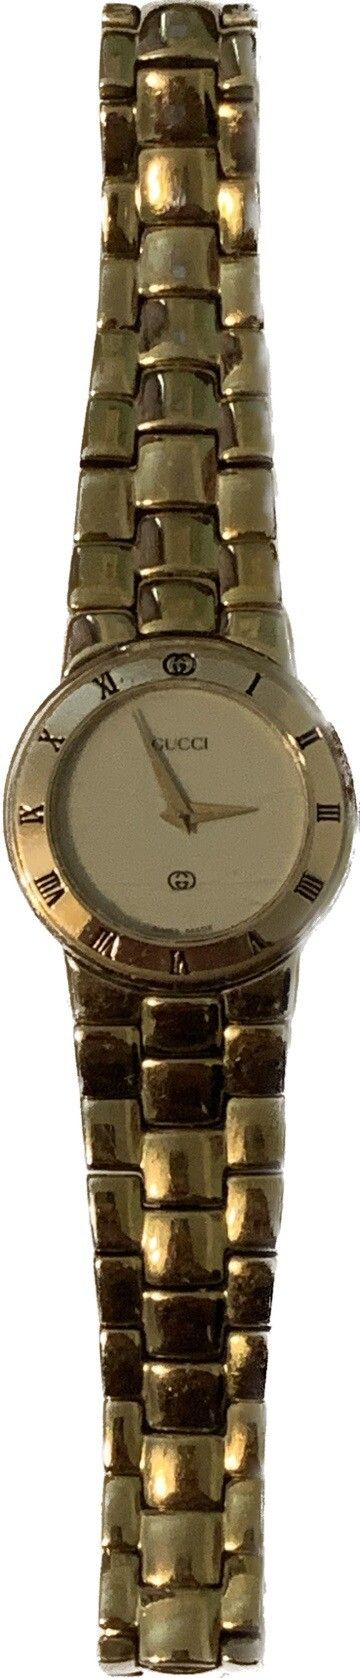 Gucci Vintage Gucci 3300L watch - Gold with White Face | Grailed